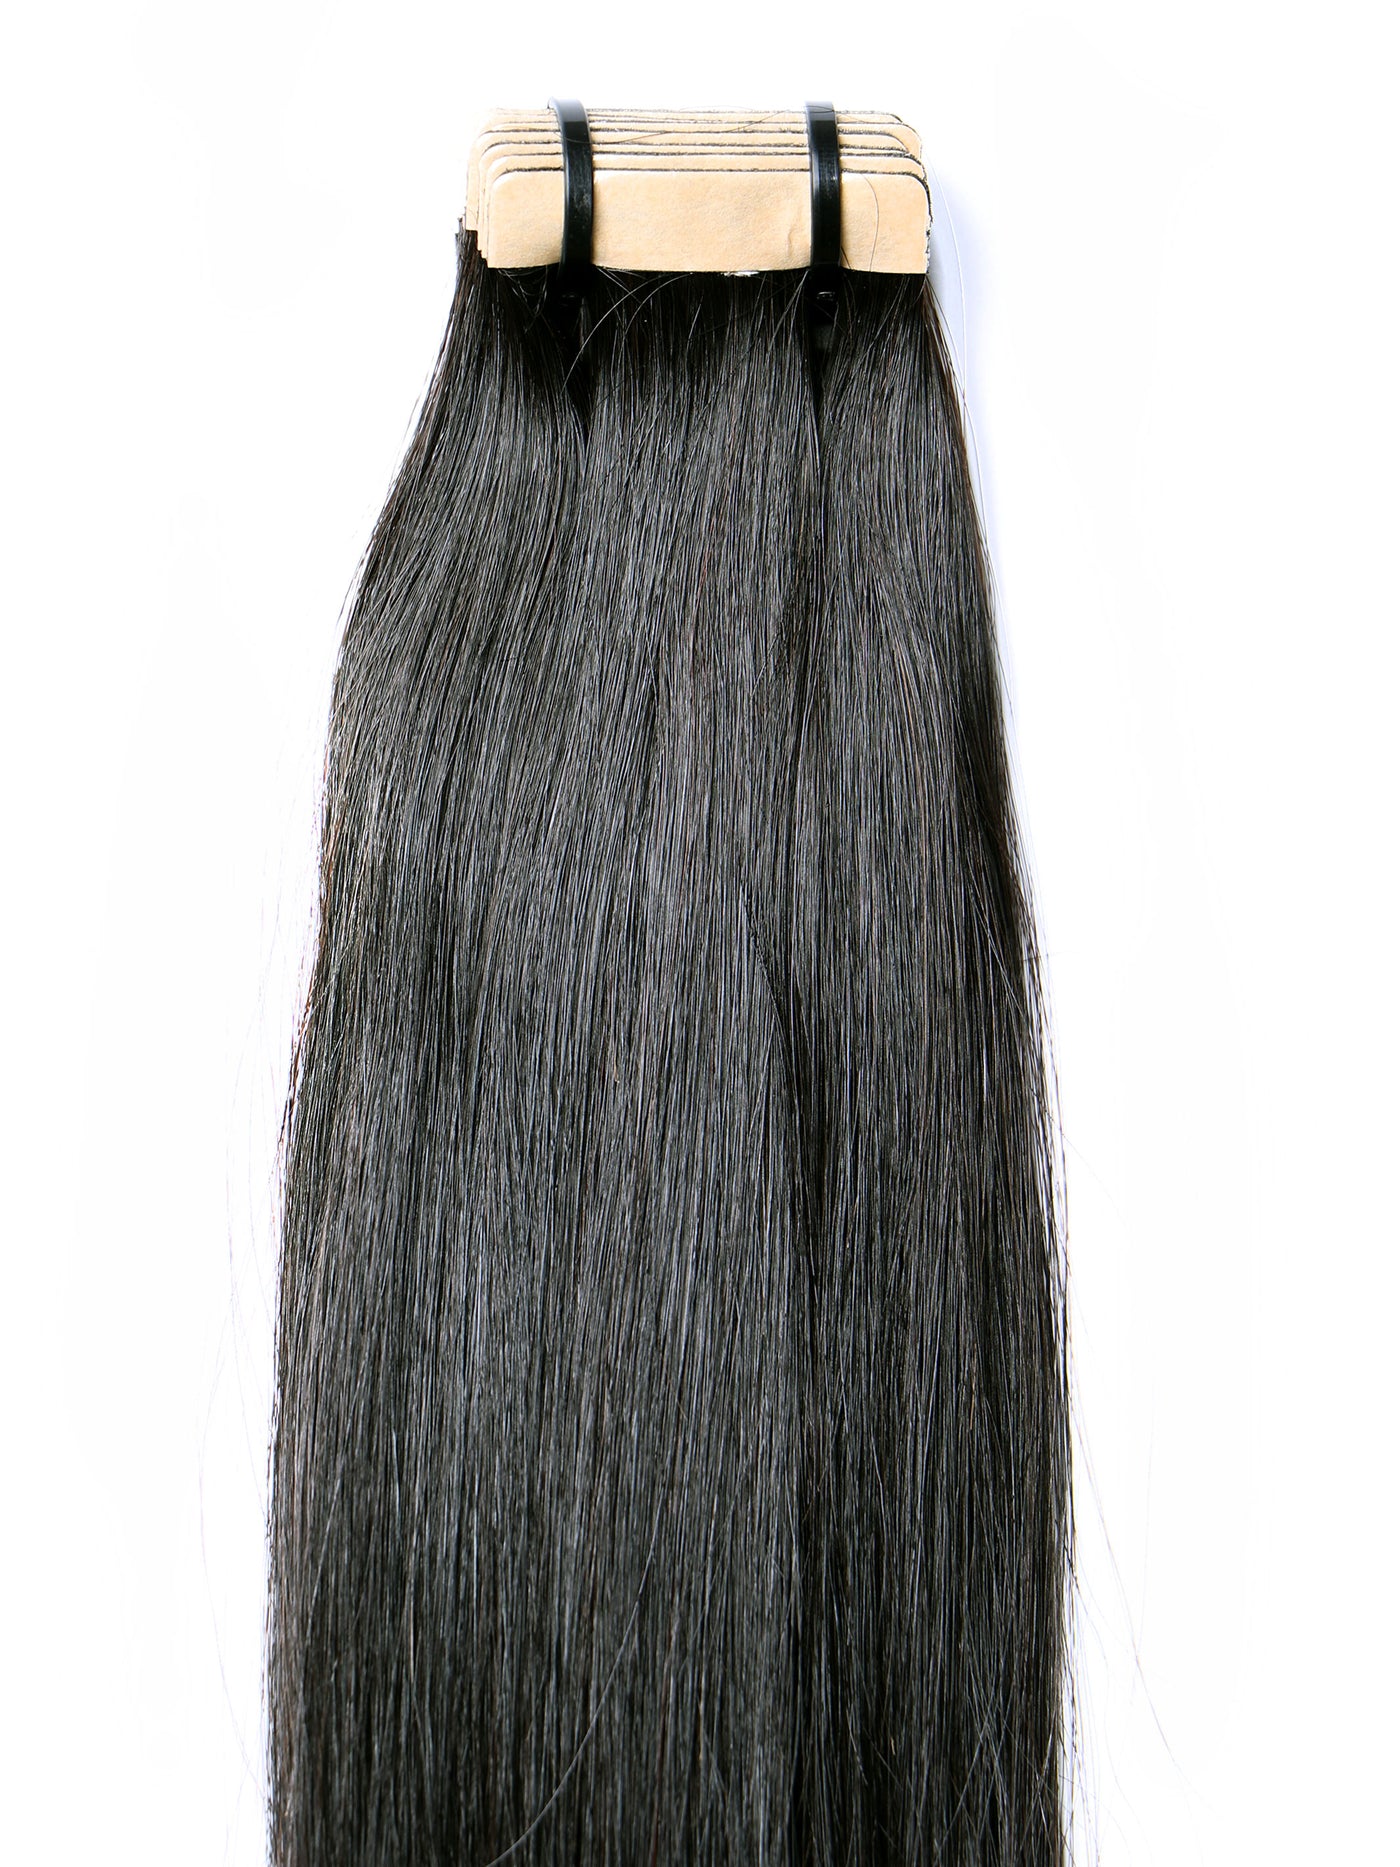 Straight Tape-In Hair Extensions Human Hair